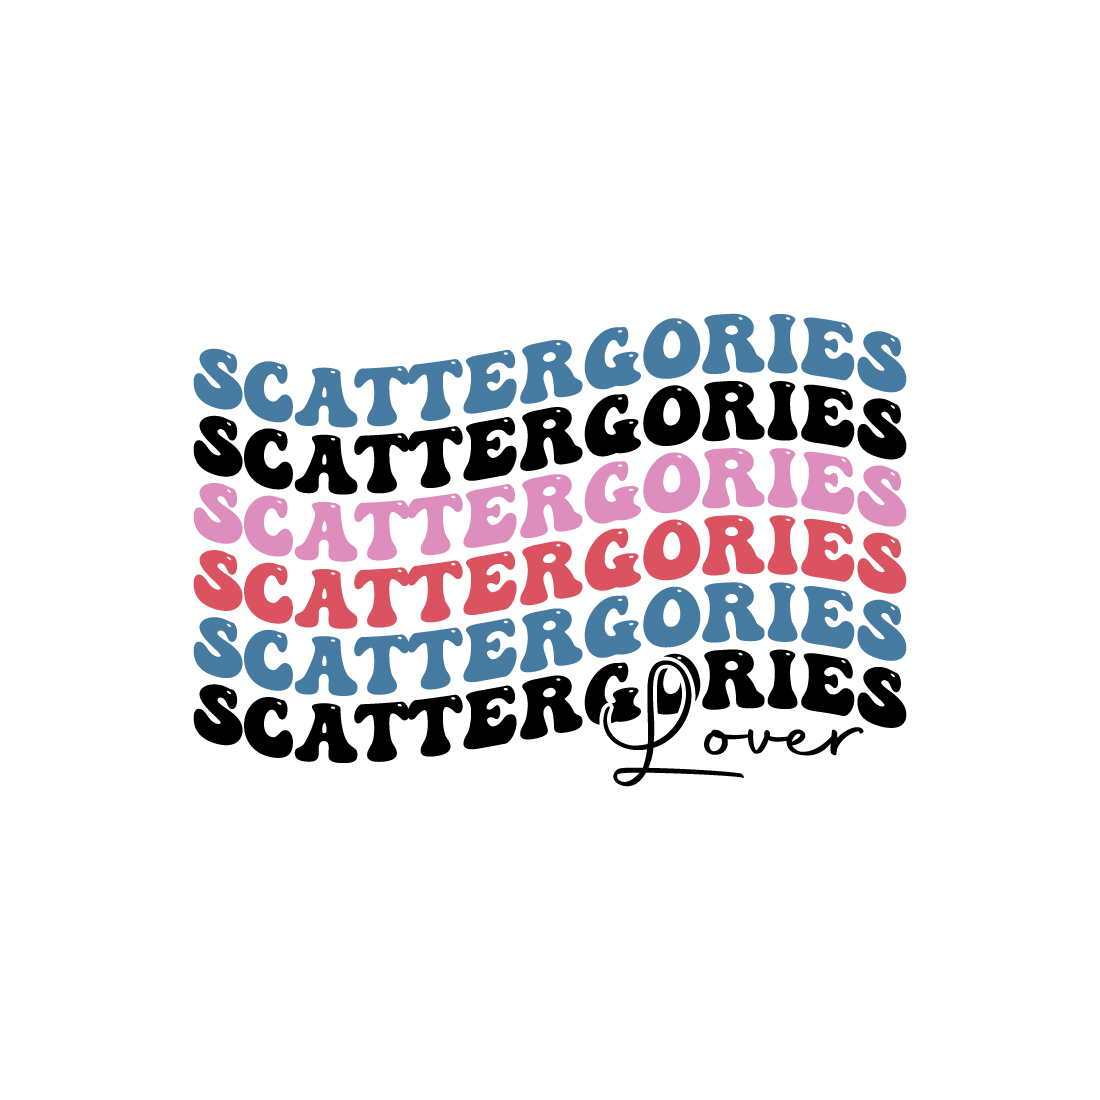 Scattergories lover indoor game retro typography design for t-shirts, cards, frame artwork, phone cases, bags, mugs, stickers, tumblers, print, etc preview image.